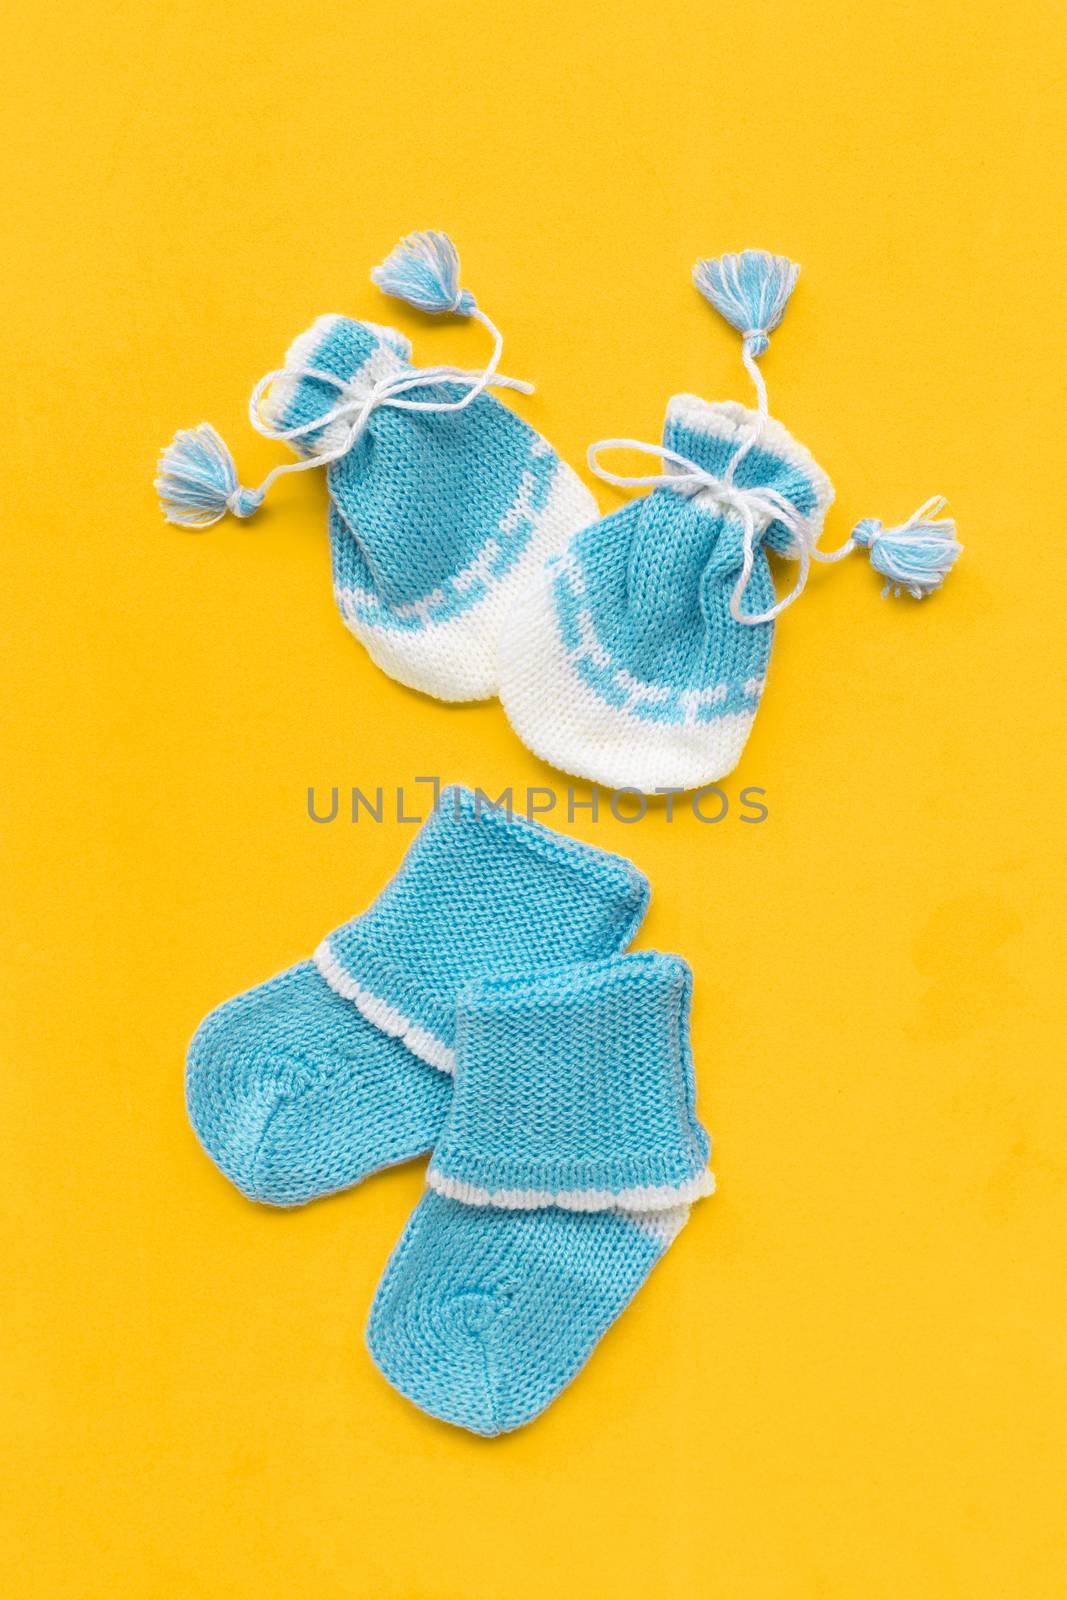 Baby gloves and socks on yellow background.  by Bowonpat